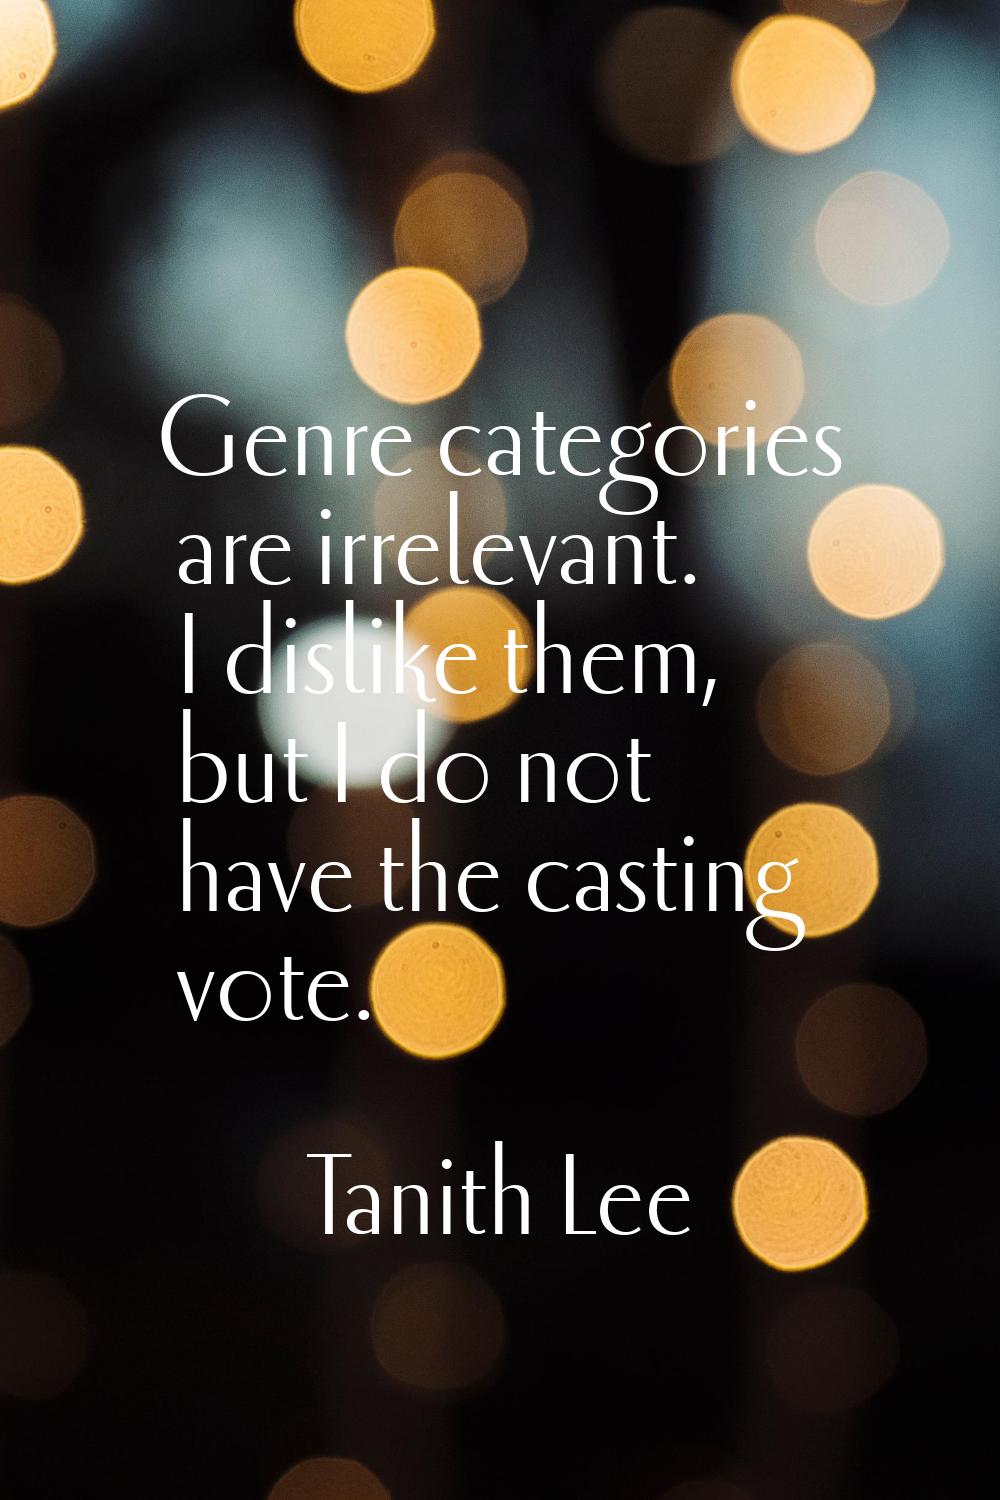 Genre categories are irrelevant. I dislike them, but I do not have the casting vote.